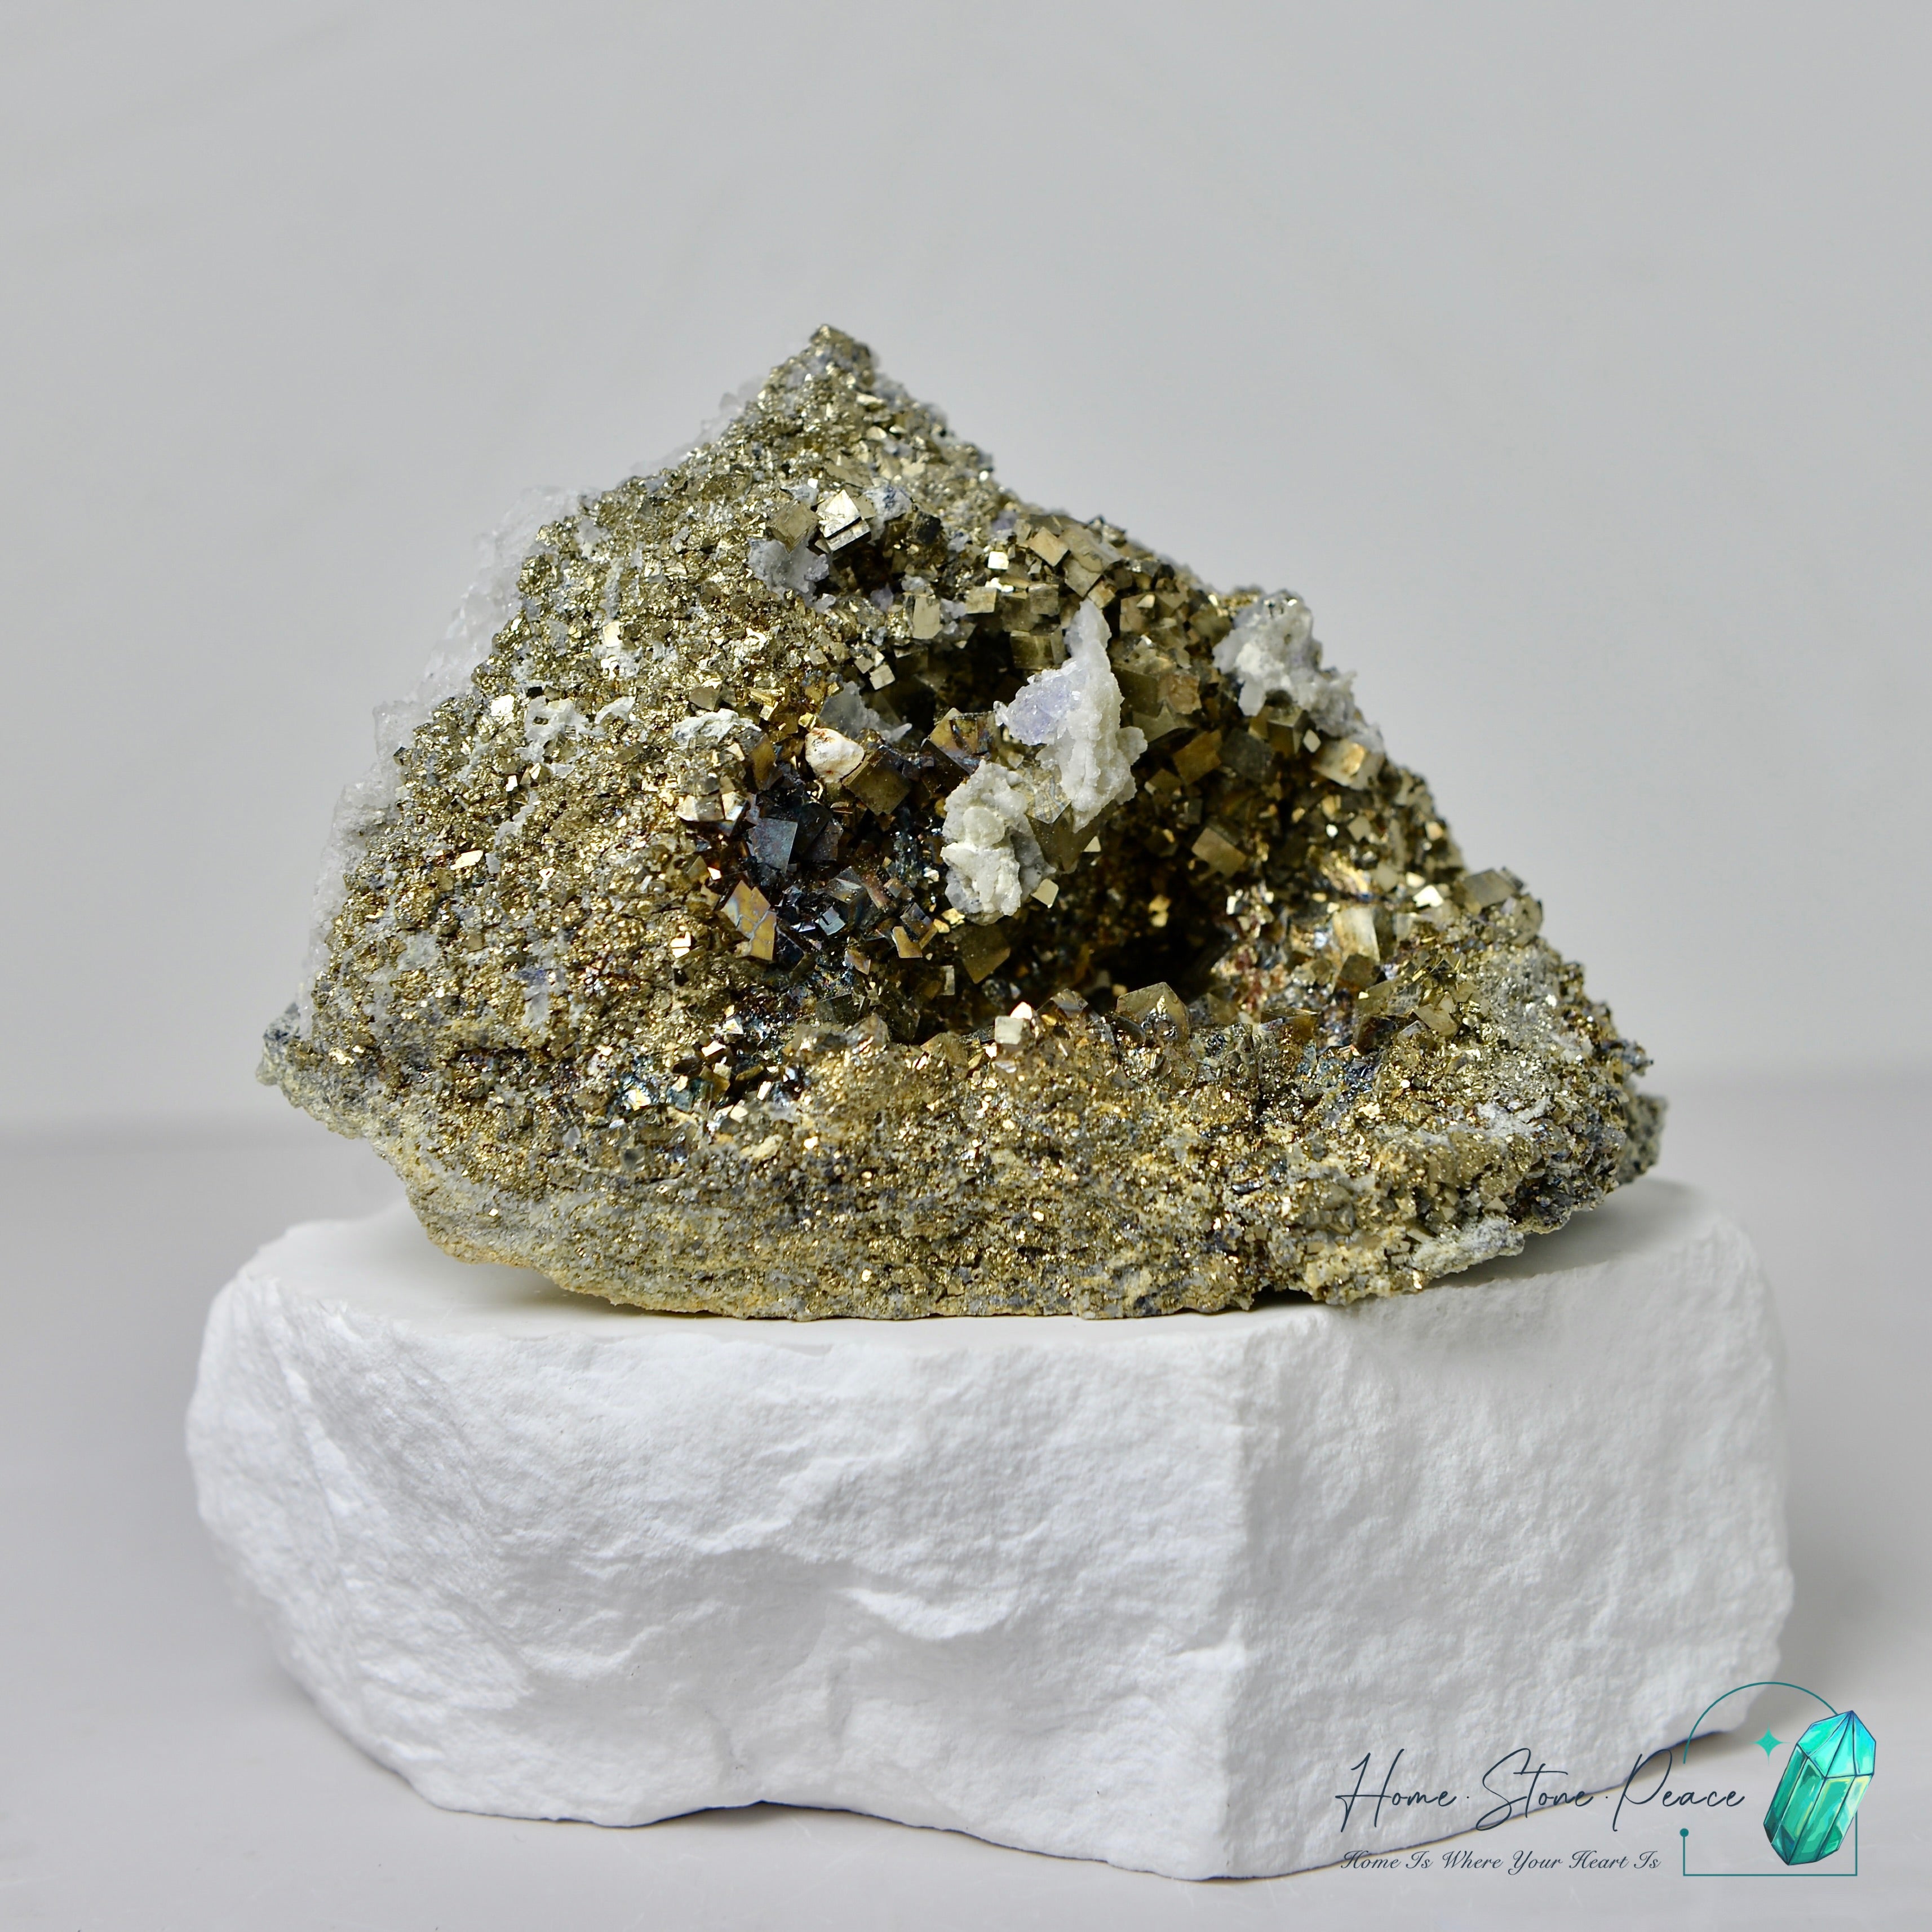 Pyrite Cluster with Calcite 黃鐵礦方解石共生原石